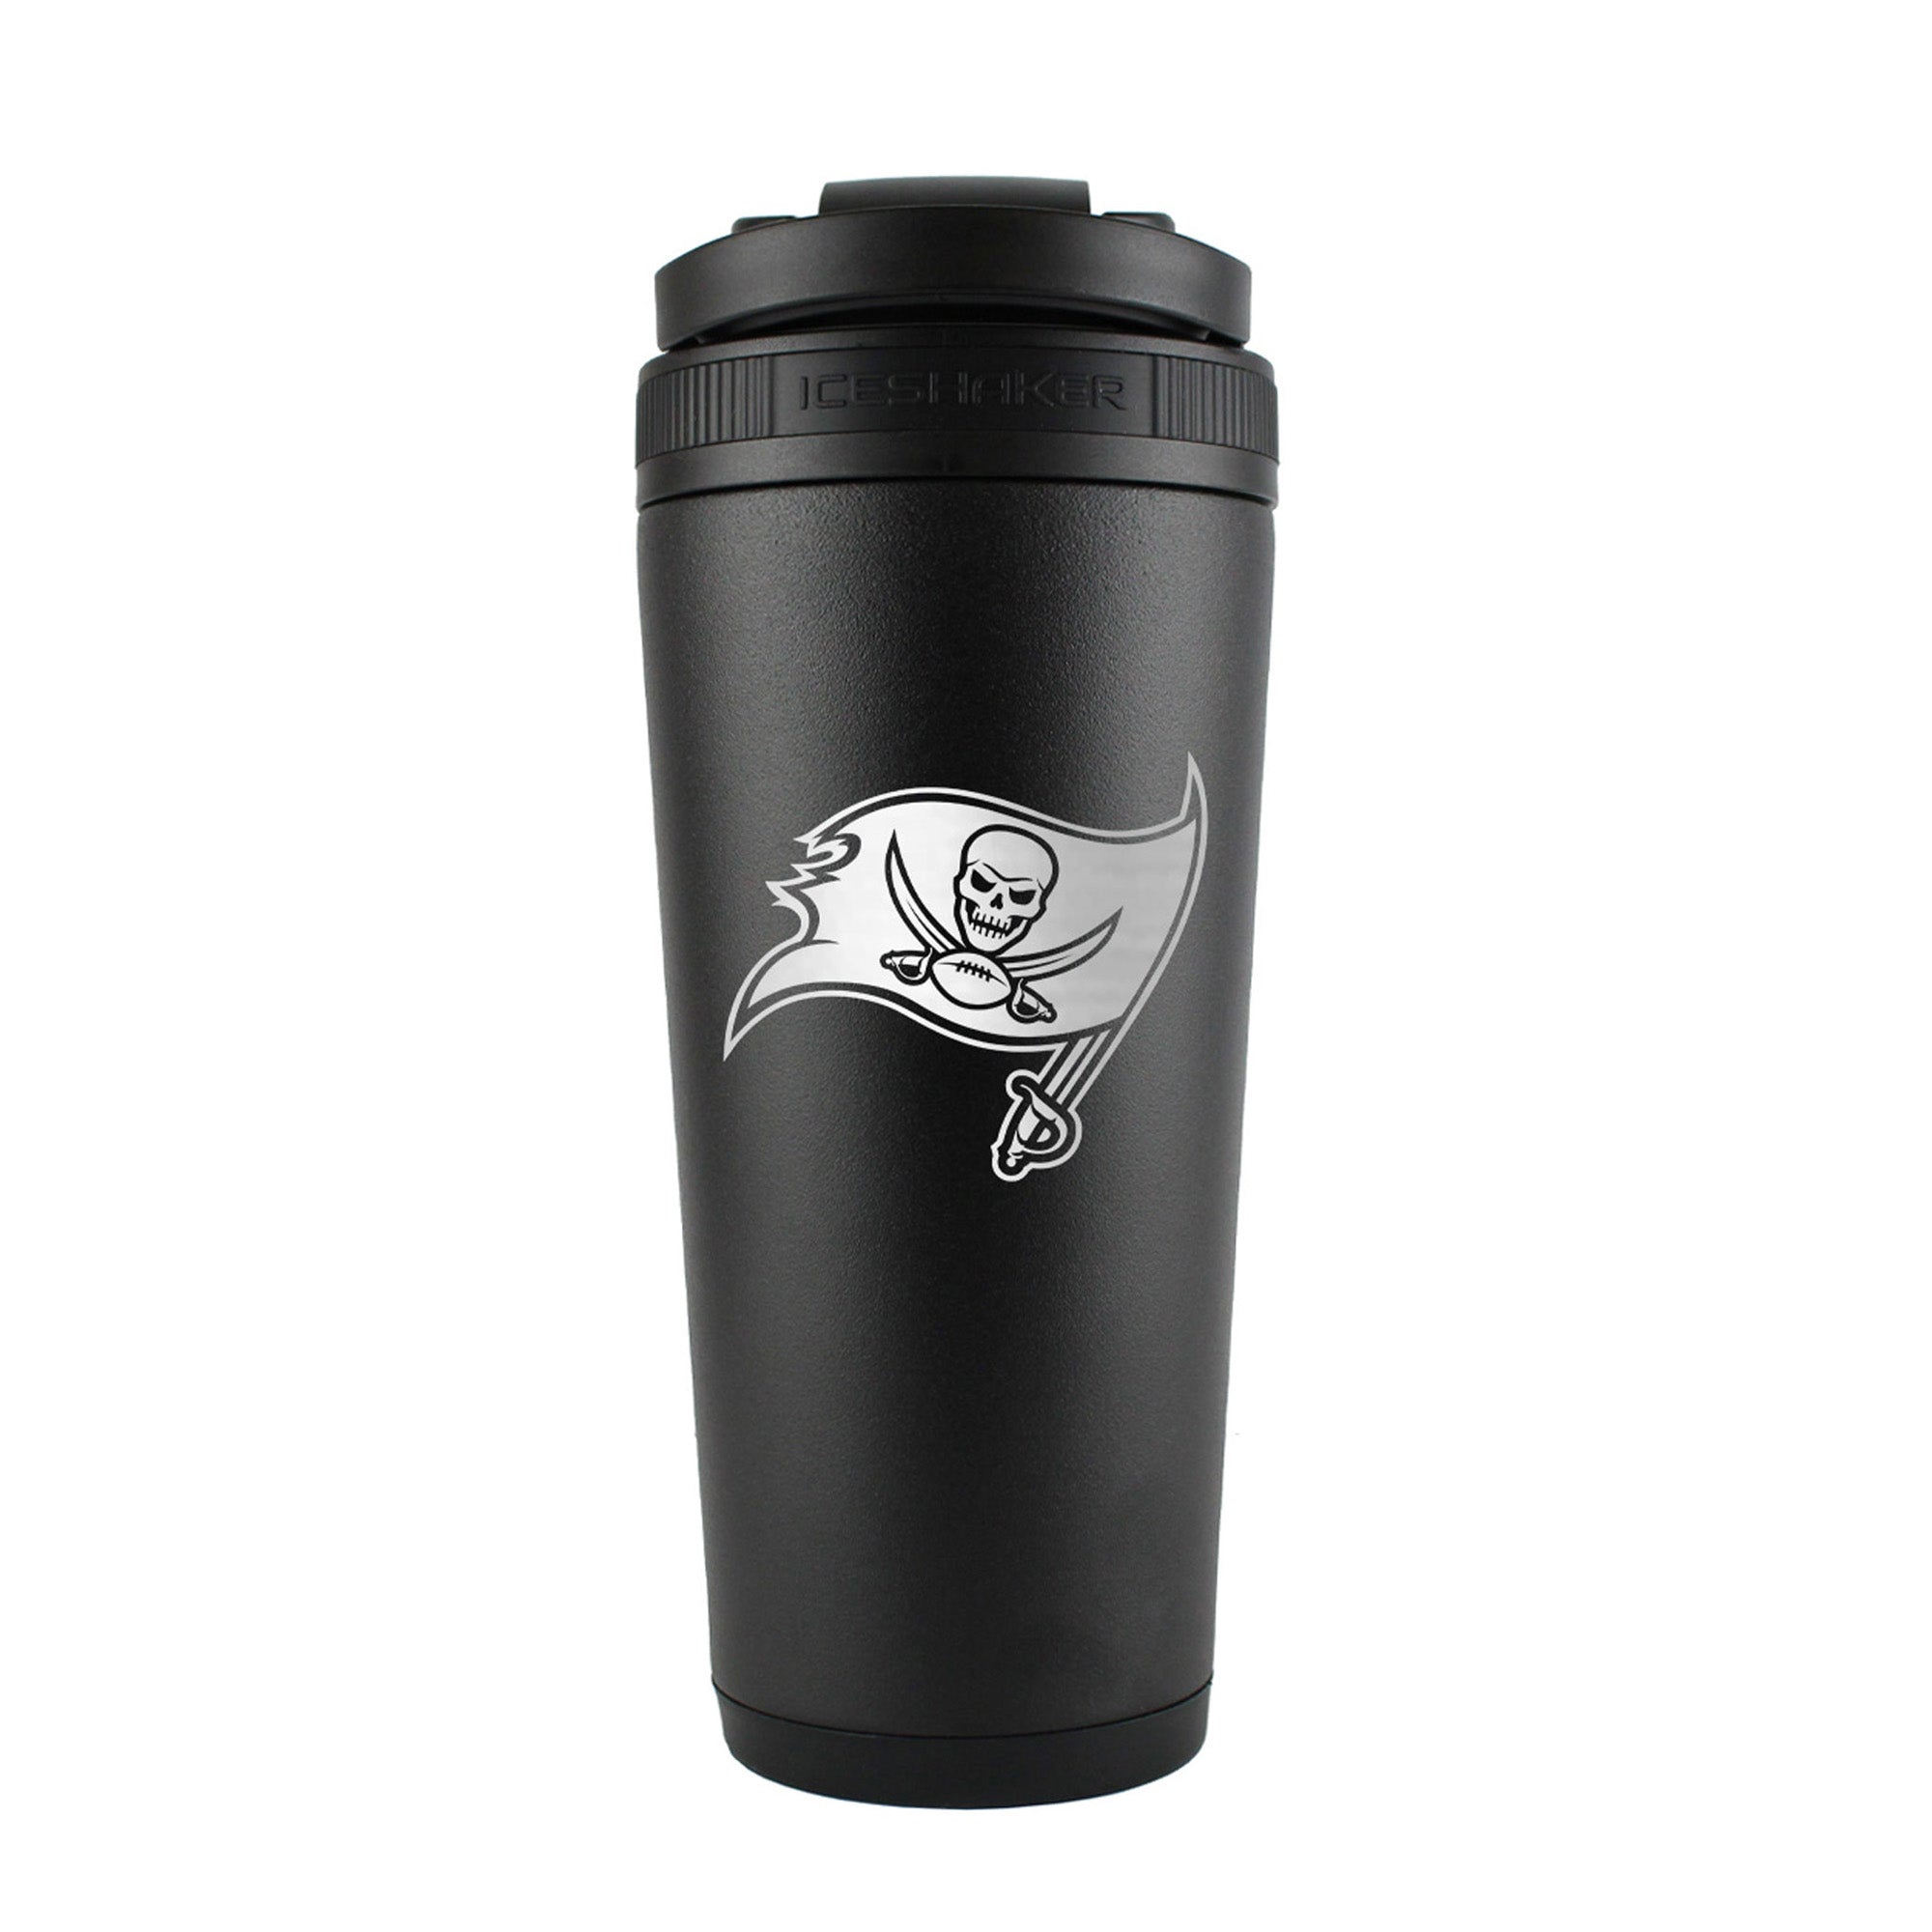 Officially Licensed Tampa Bay Buccaneers 26oz Ice Shaker - Black